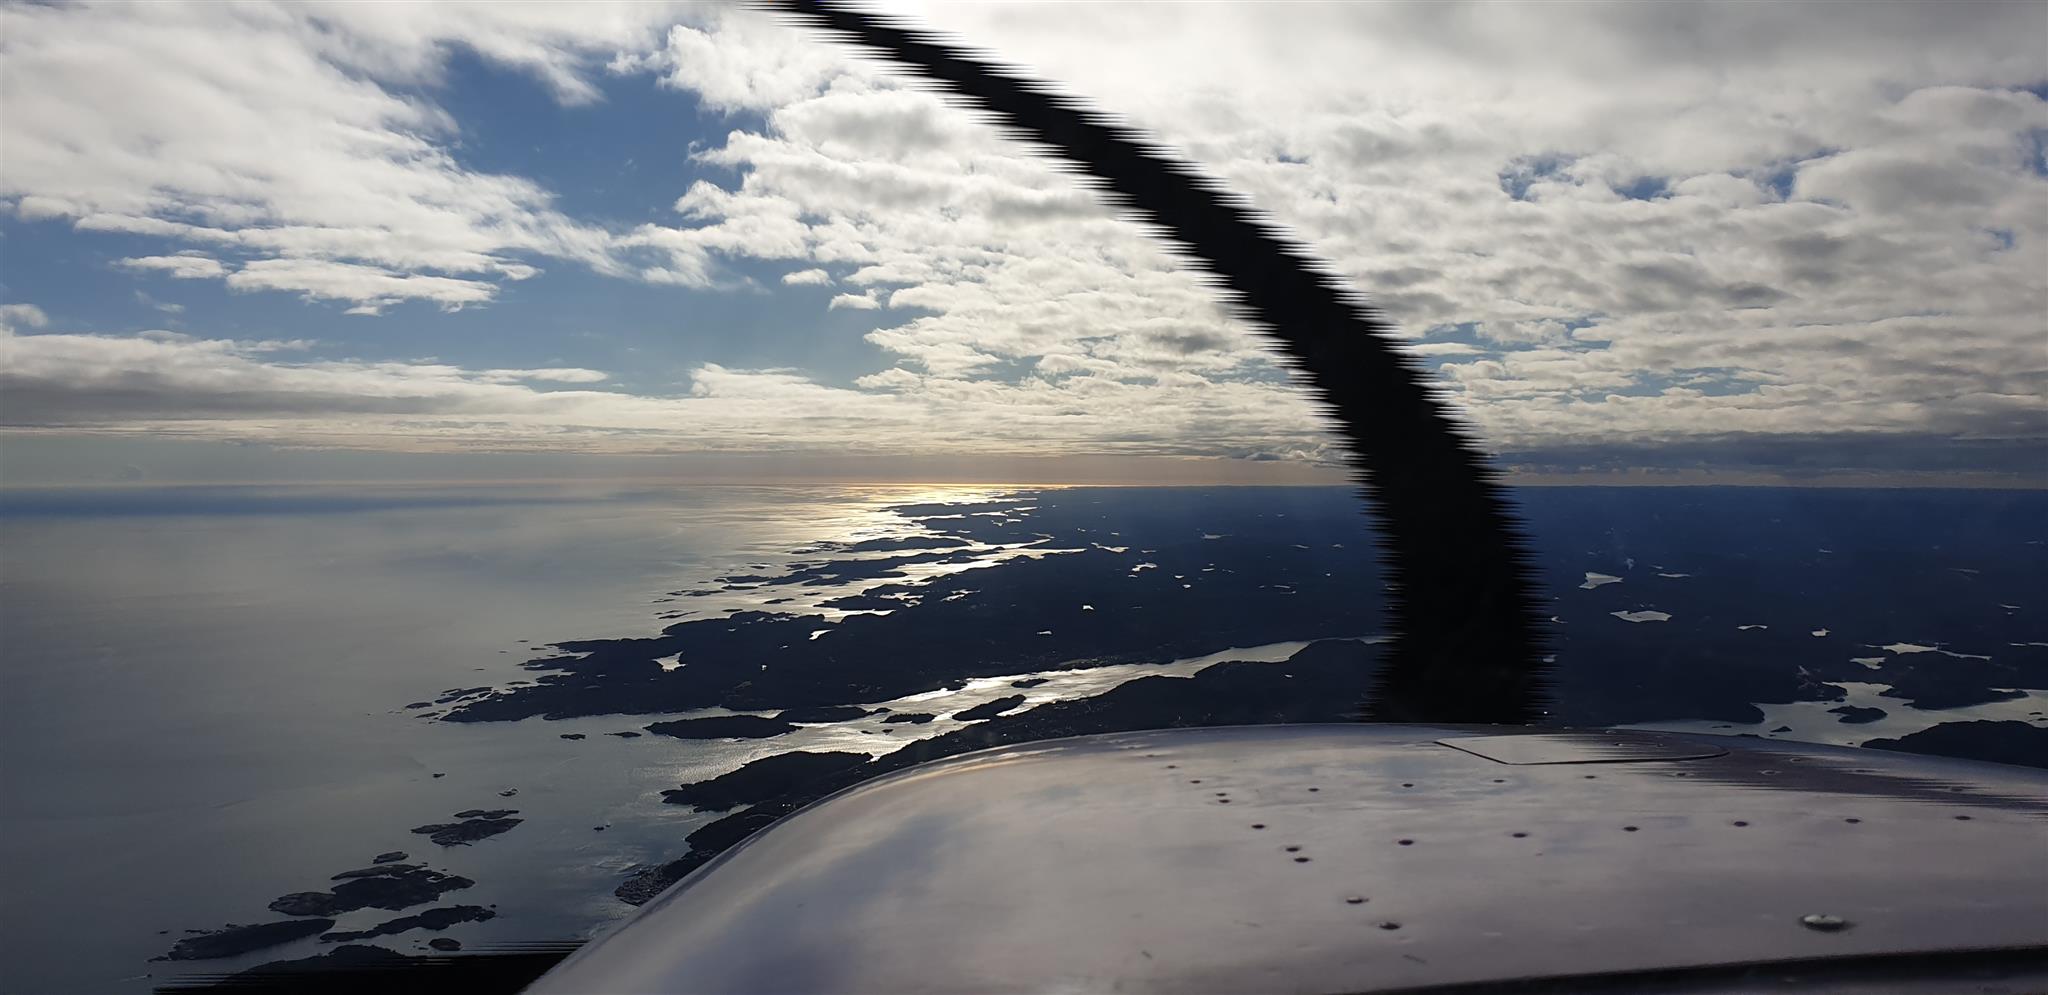 image from My first flight as a private pilot - ENNO-ENHD